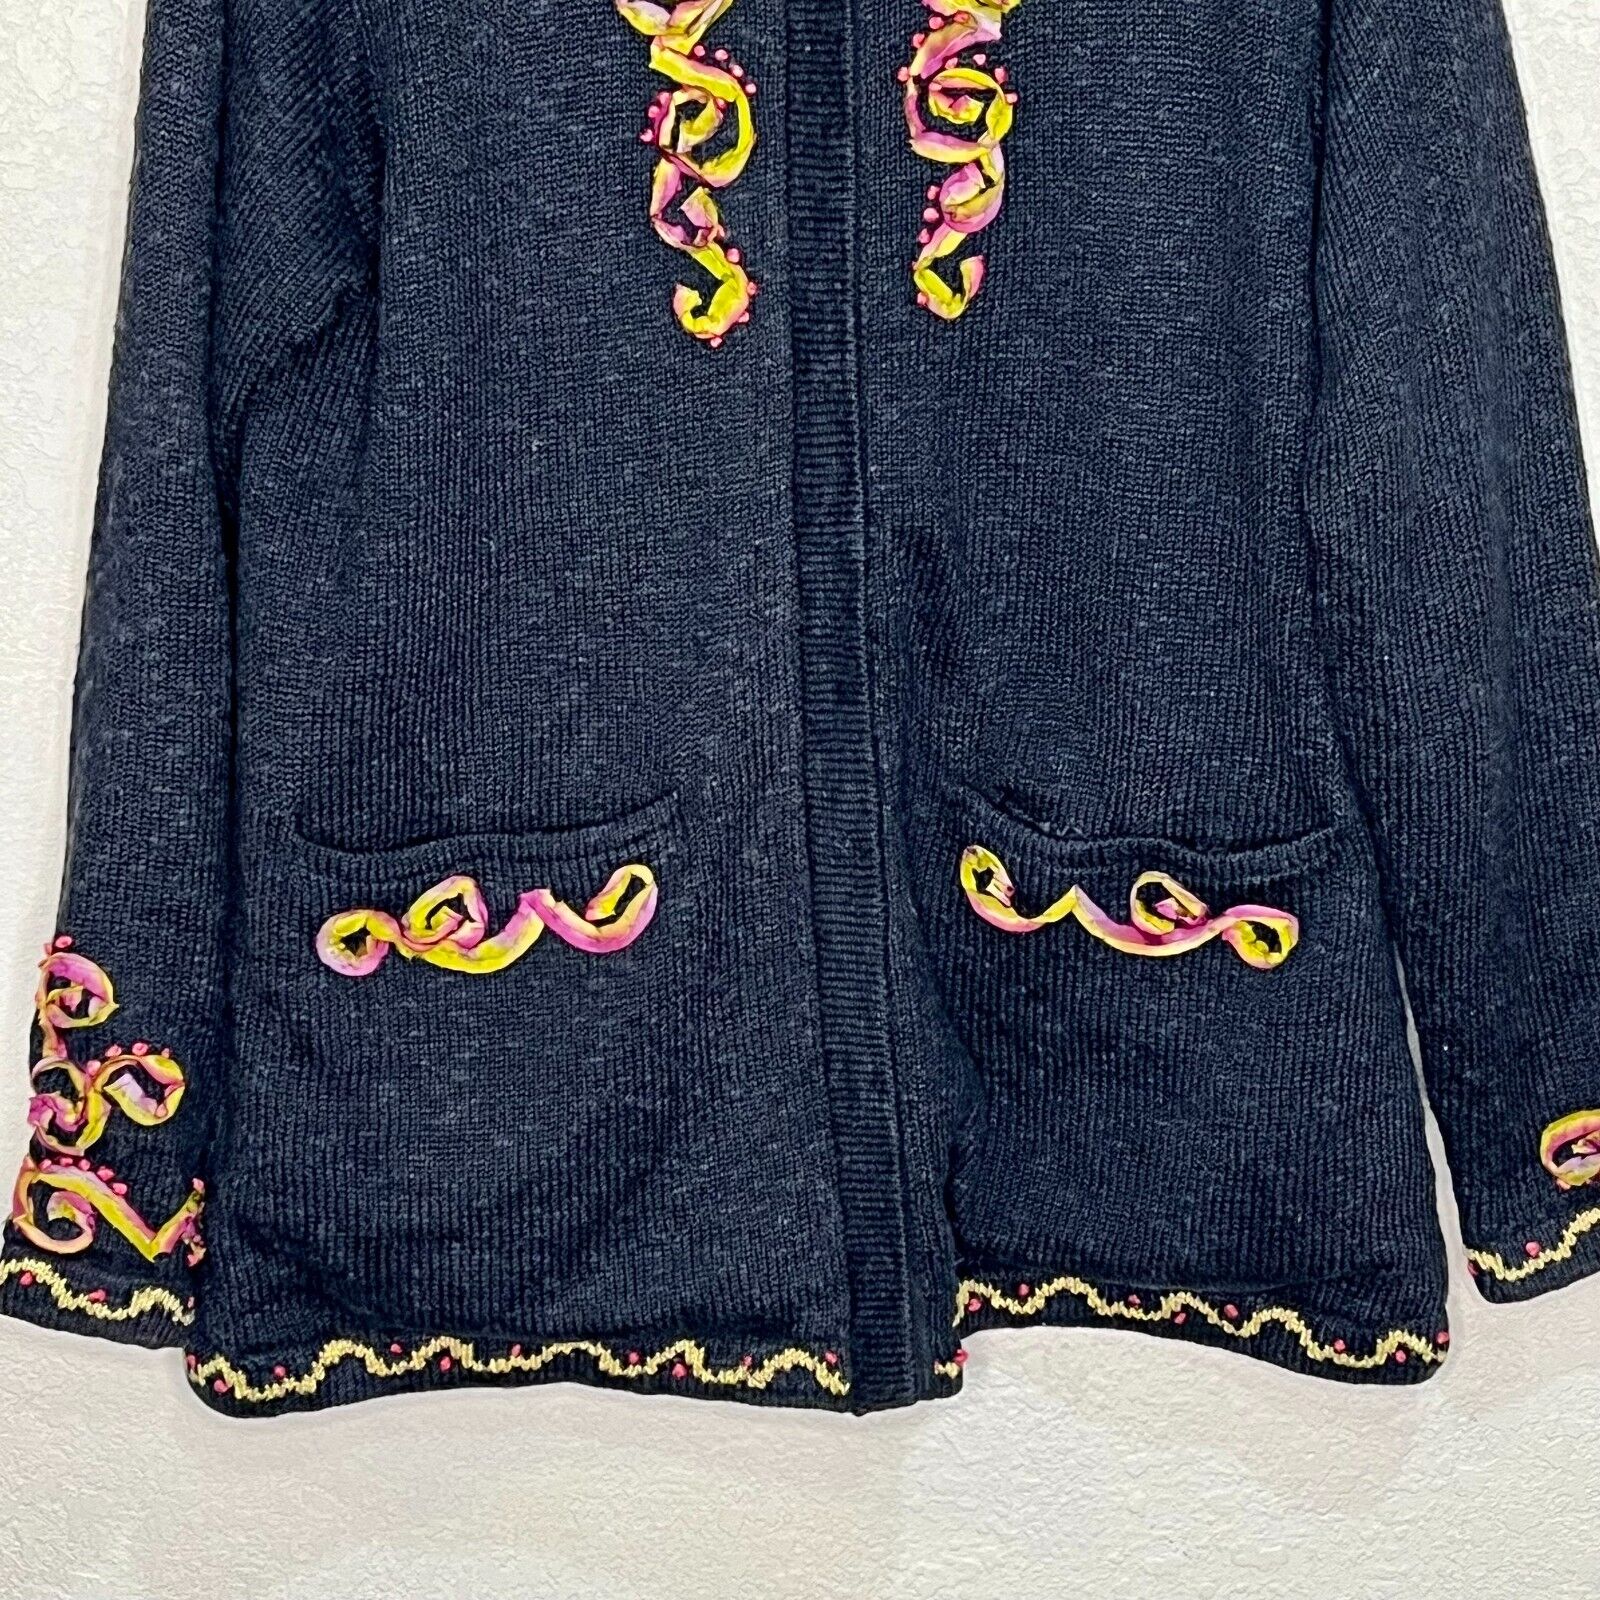 Icelandic Design Sweater Jacket Full Zip Lined Ribbon Applique Black Size Small